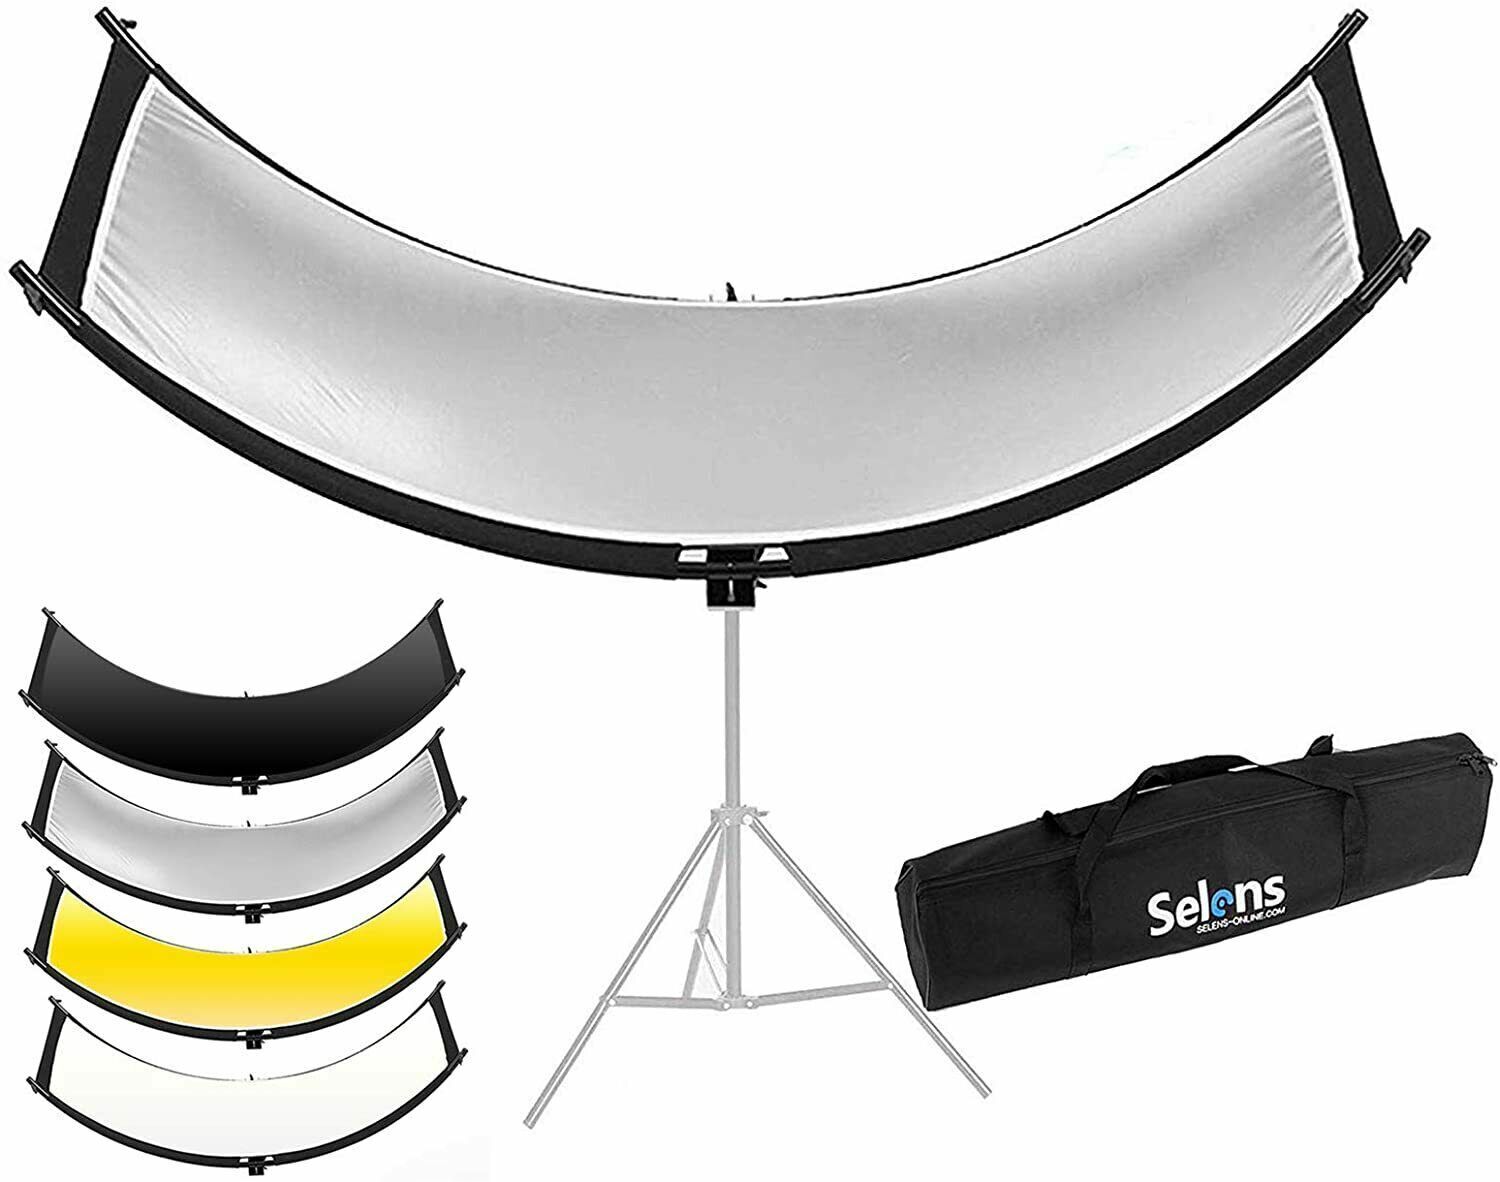 Enhancing Photography with a Curved Reflector